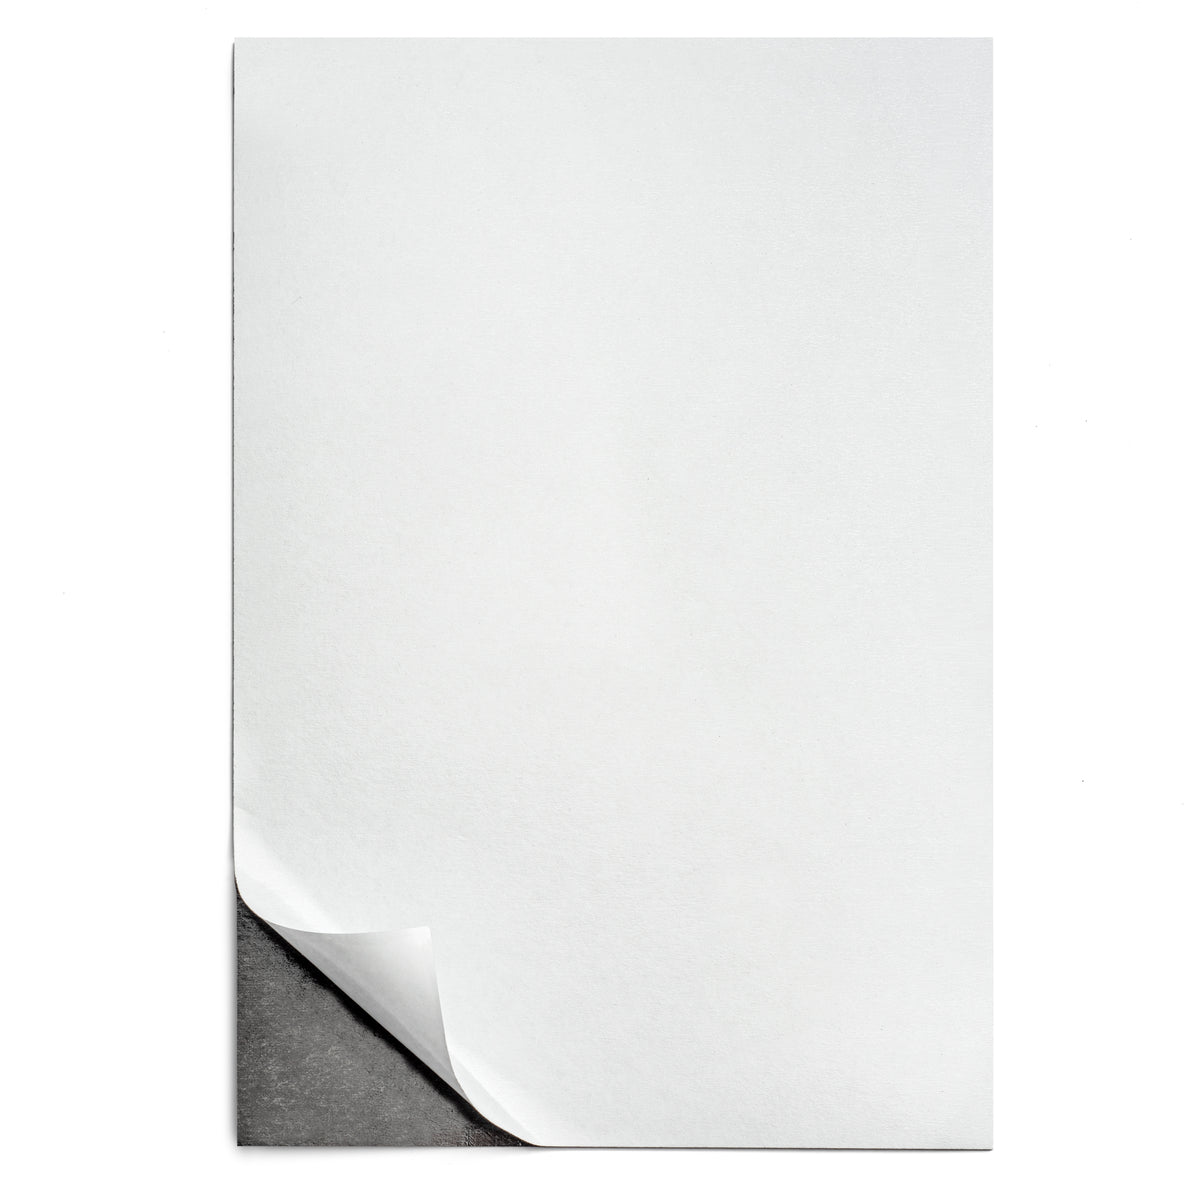 A4 Magnetic Sheets With Adhesive Backing/No Adhesive Backing  Size:297mmx210mm